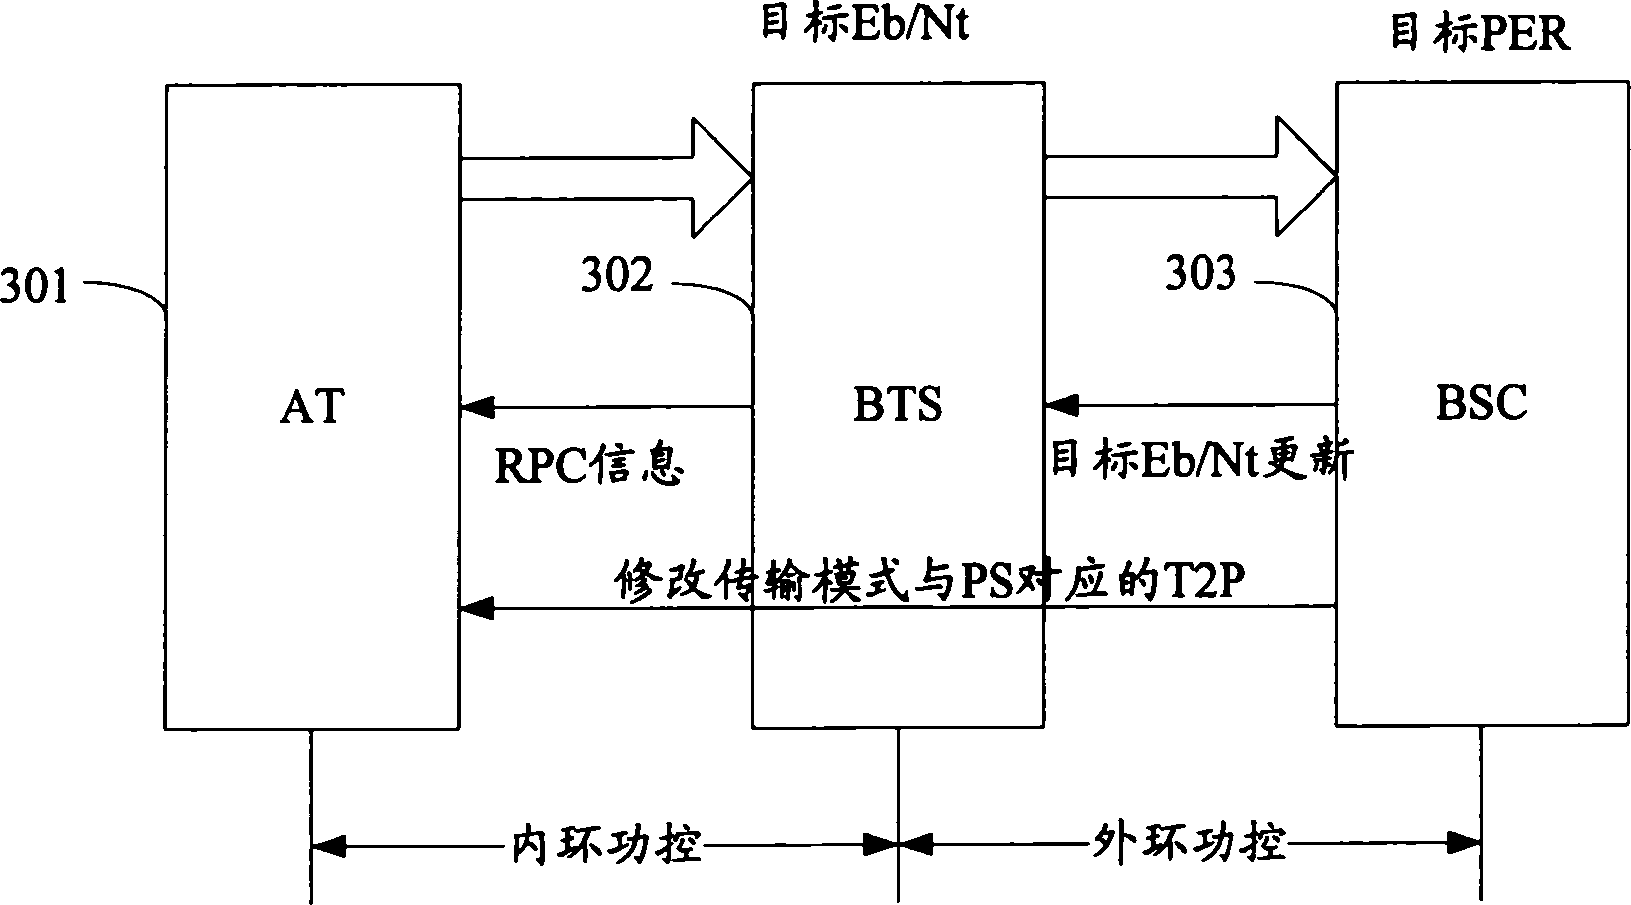 Method for regulating inversed business channel power